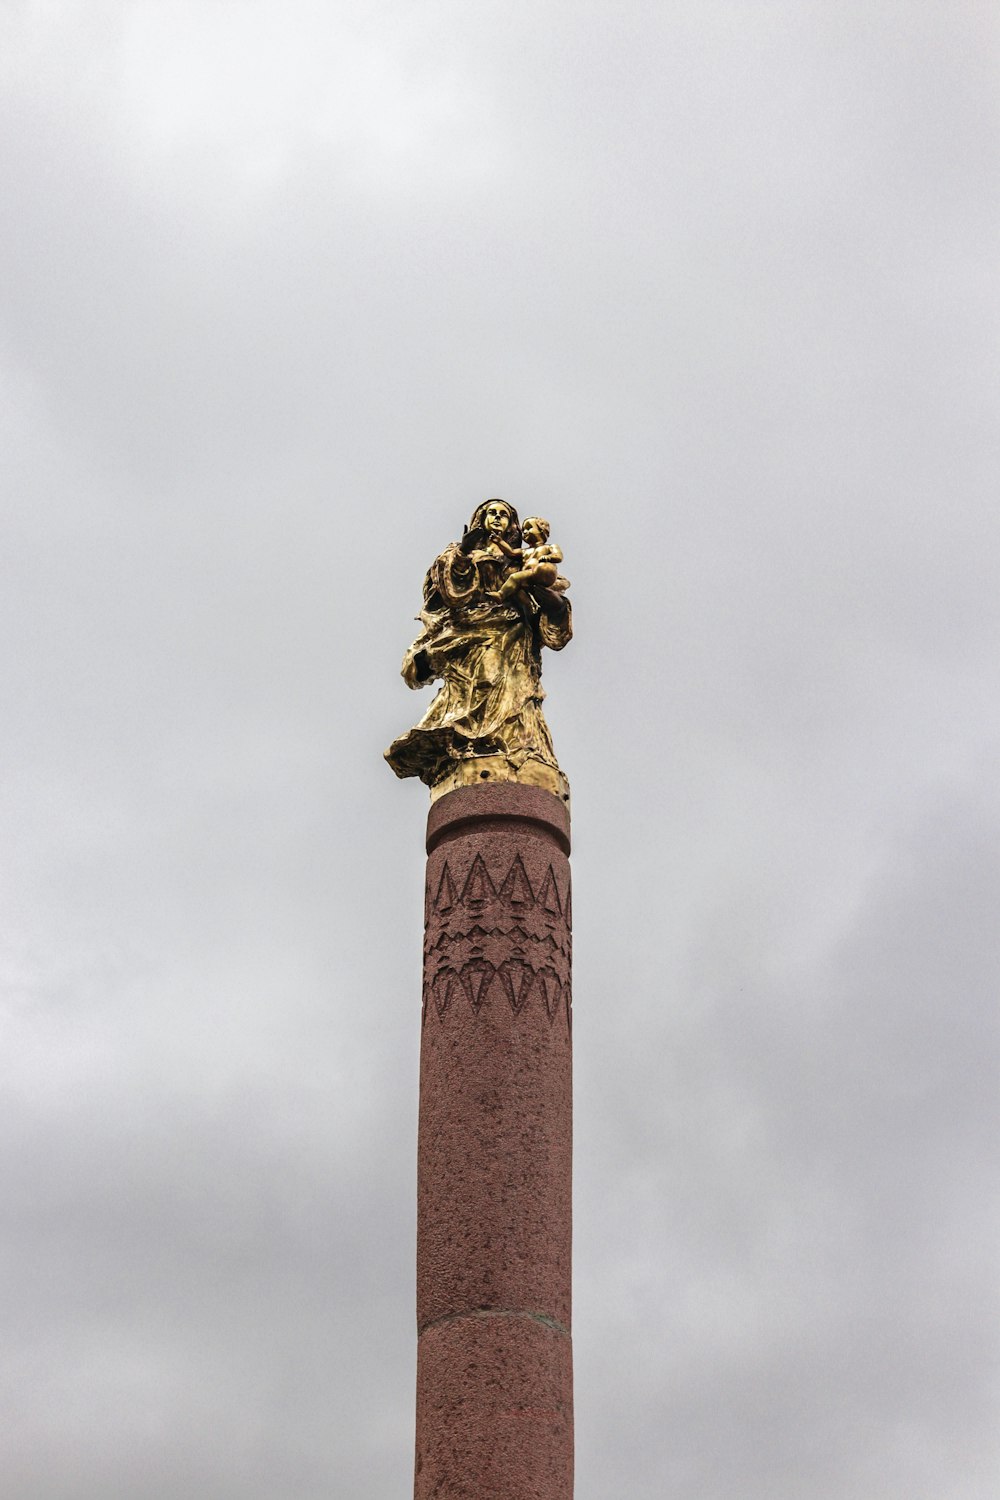 brown concrete statue under white clouds during daytime